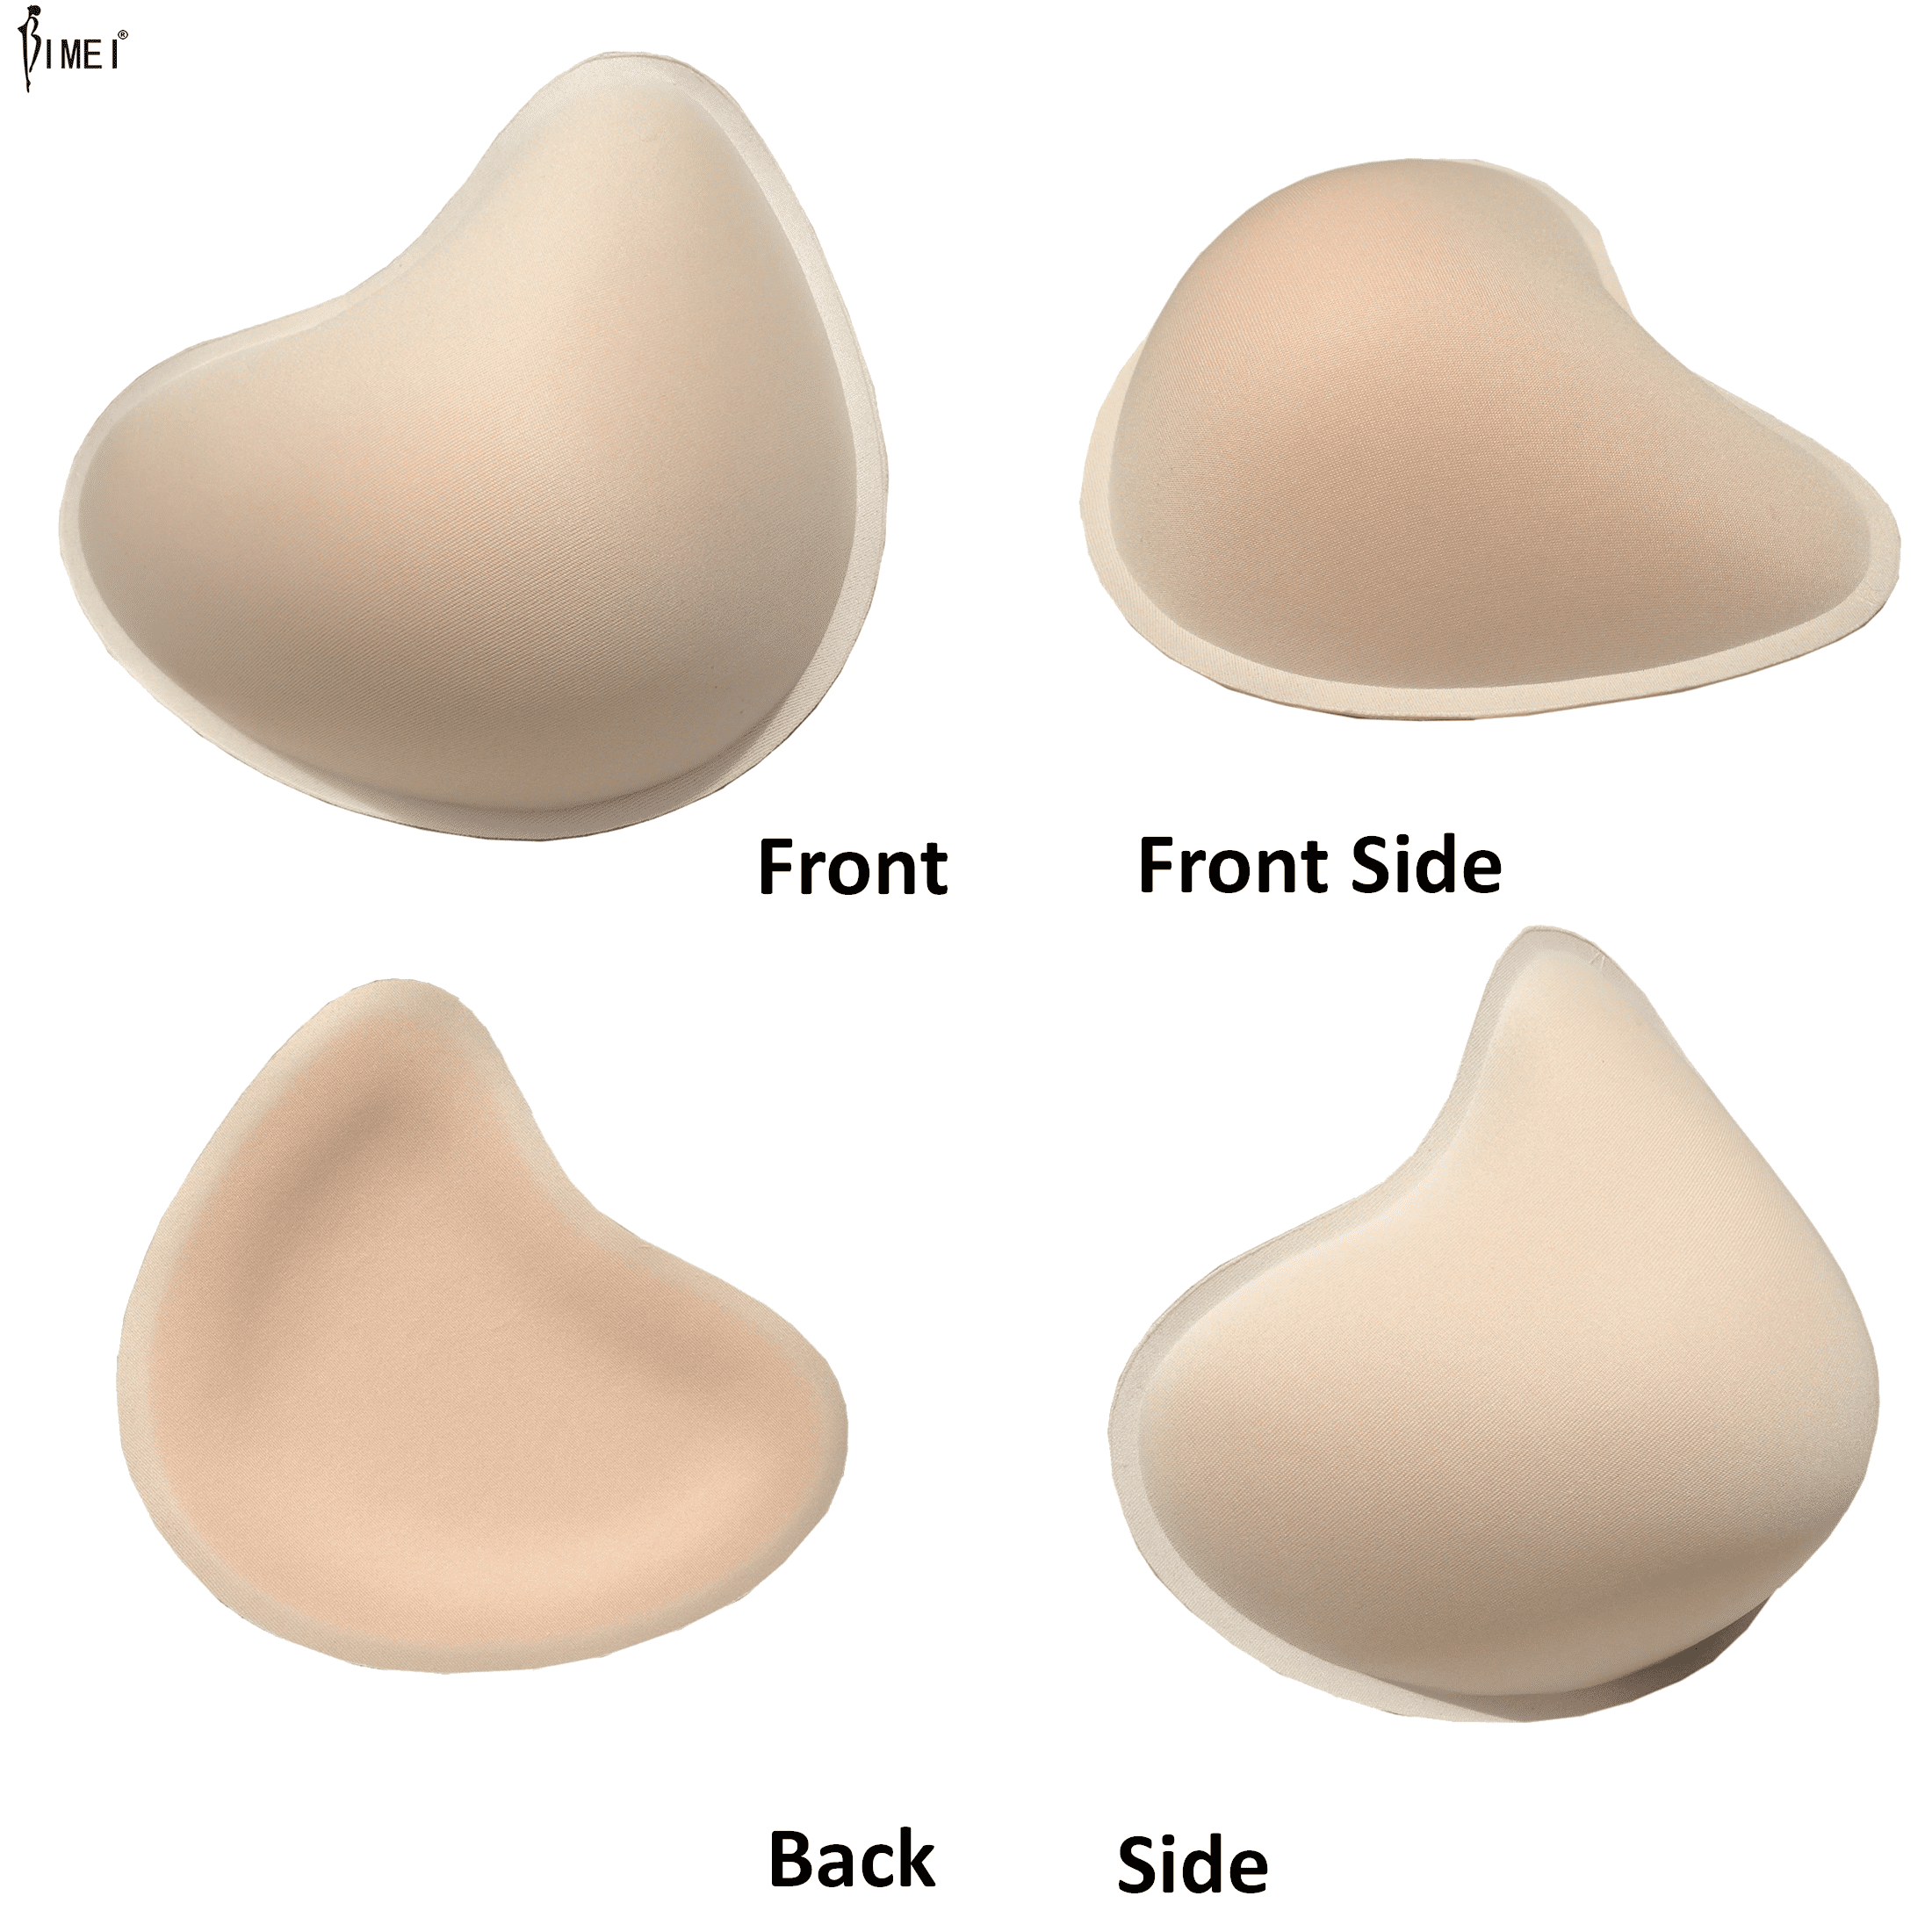 BIMEI Cotton Breast Forms Breast Prosthesis Mastectomy Bra Insert Pads  Light-weight Ventilation Sponge Boobs for Women Mastectomy Breast Cancer  Support #1,Holey Spiral,1 Piece,Right,M 